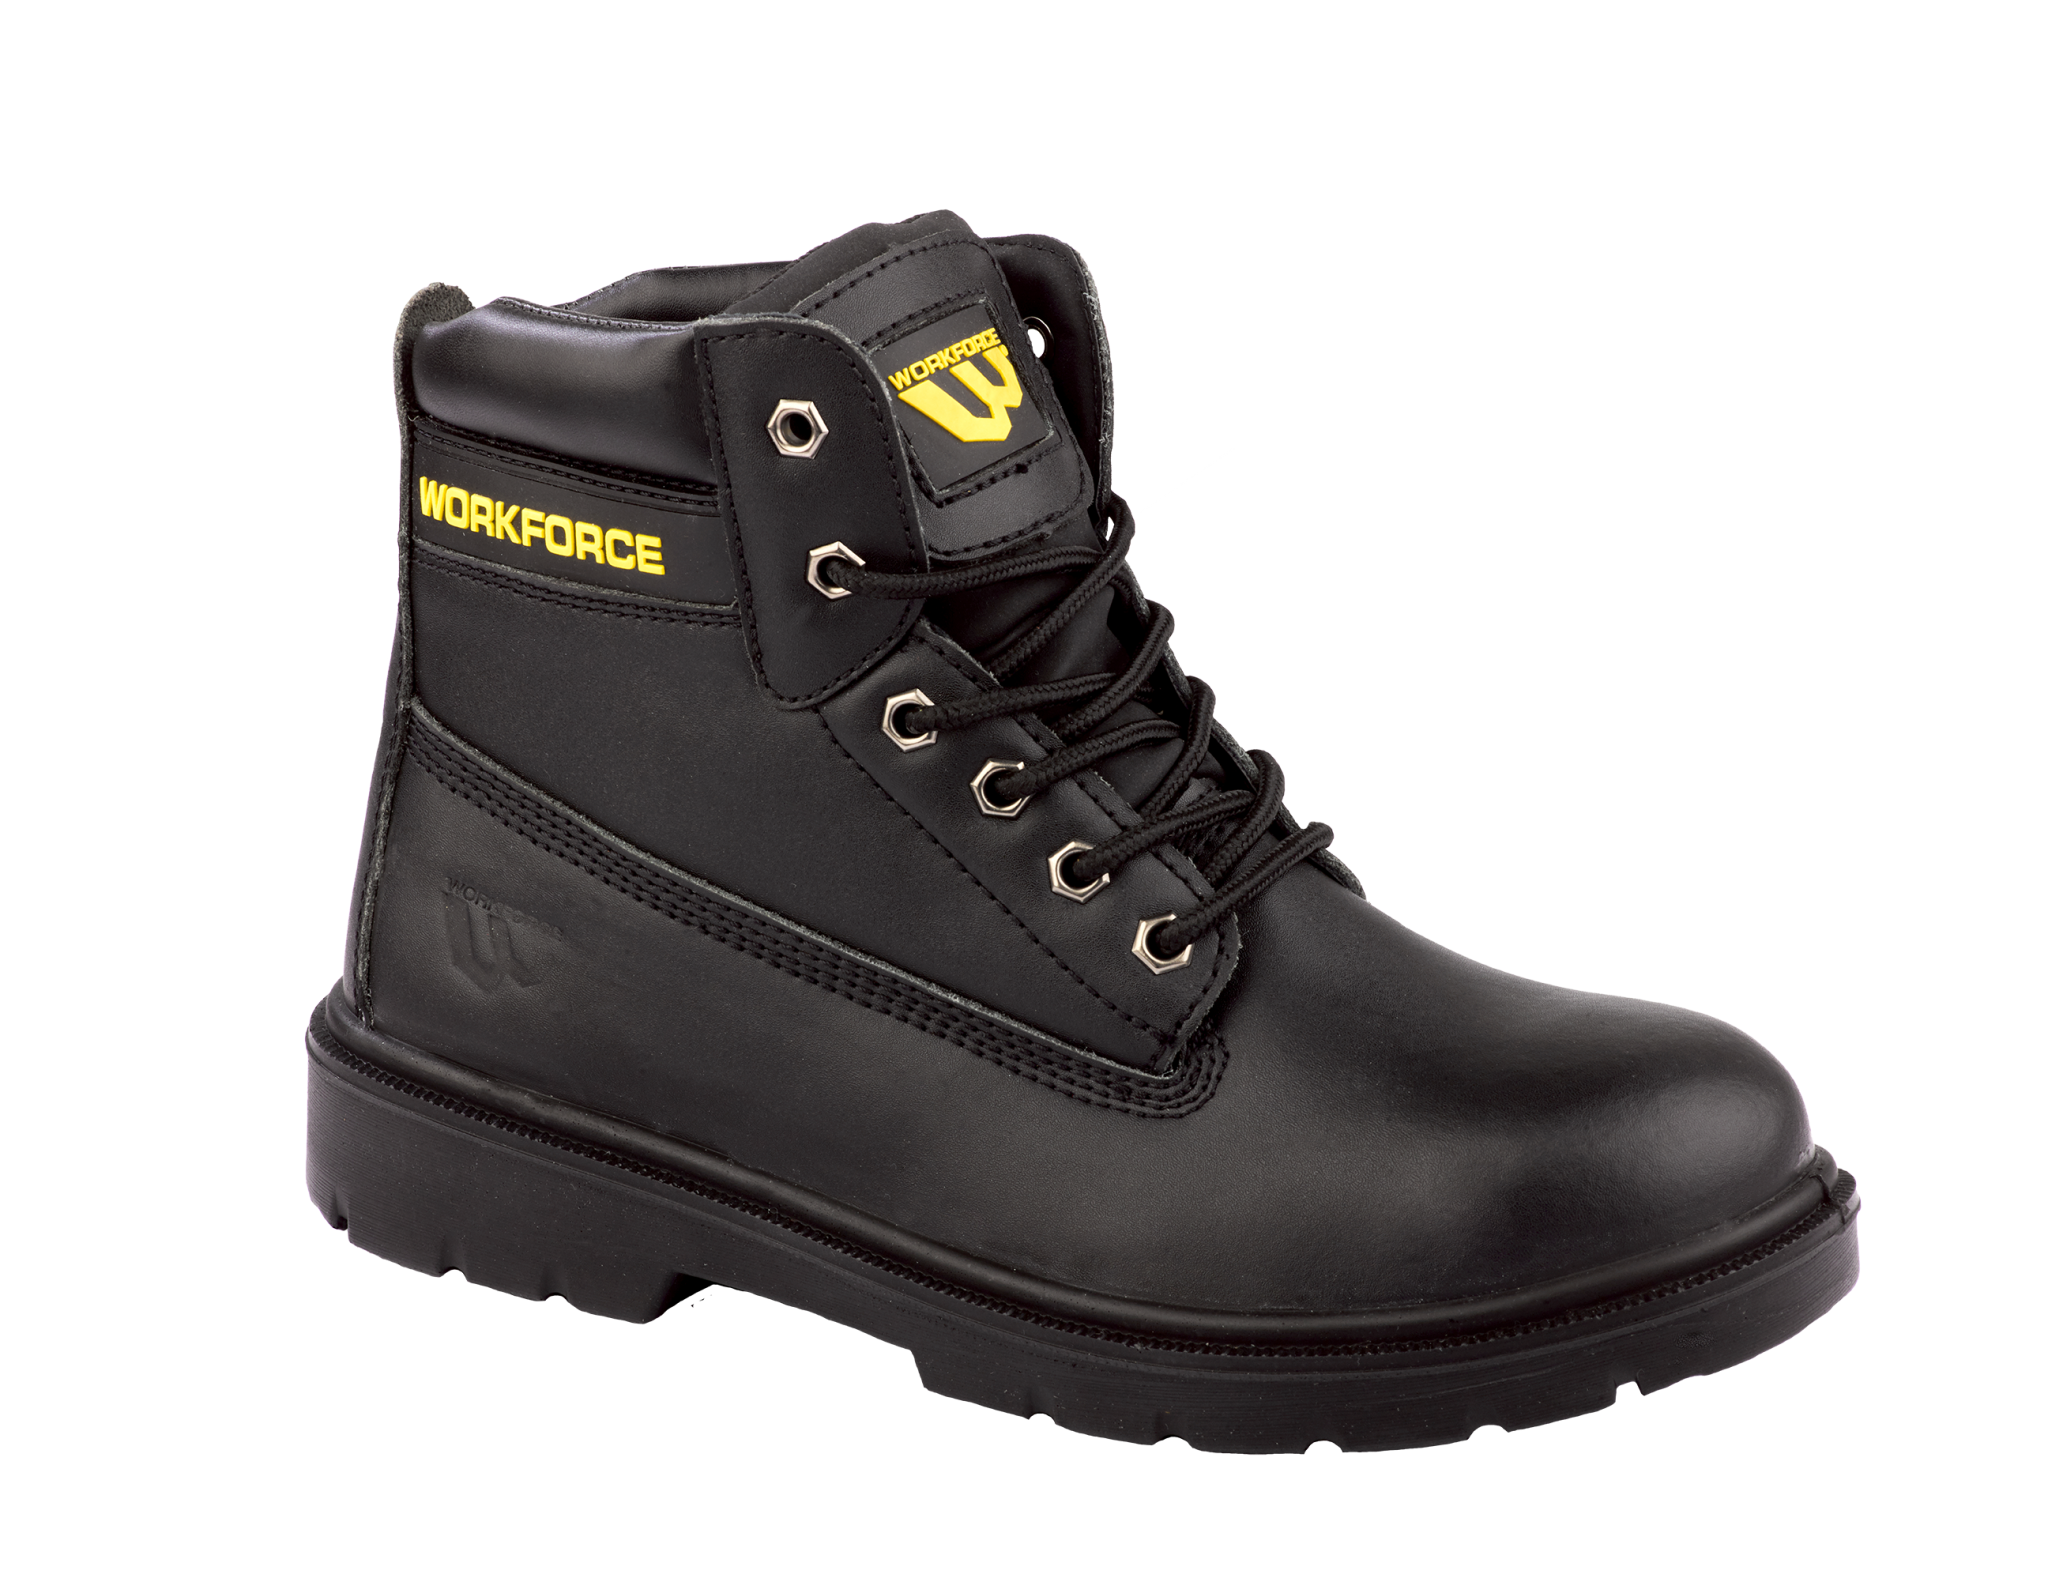 WORKFORCE BLACK LEATHER SAFETY BOOT S1P CLASSIC STYLE WITH MODERN SAFETY (WF302)